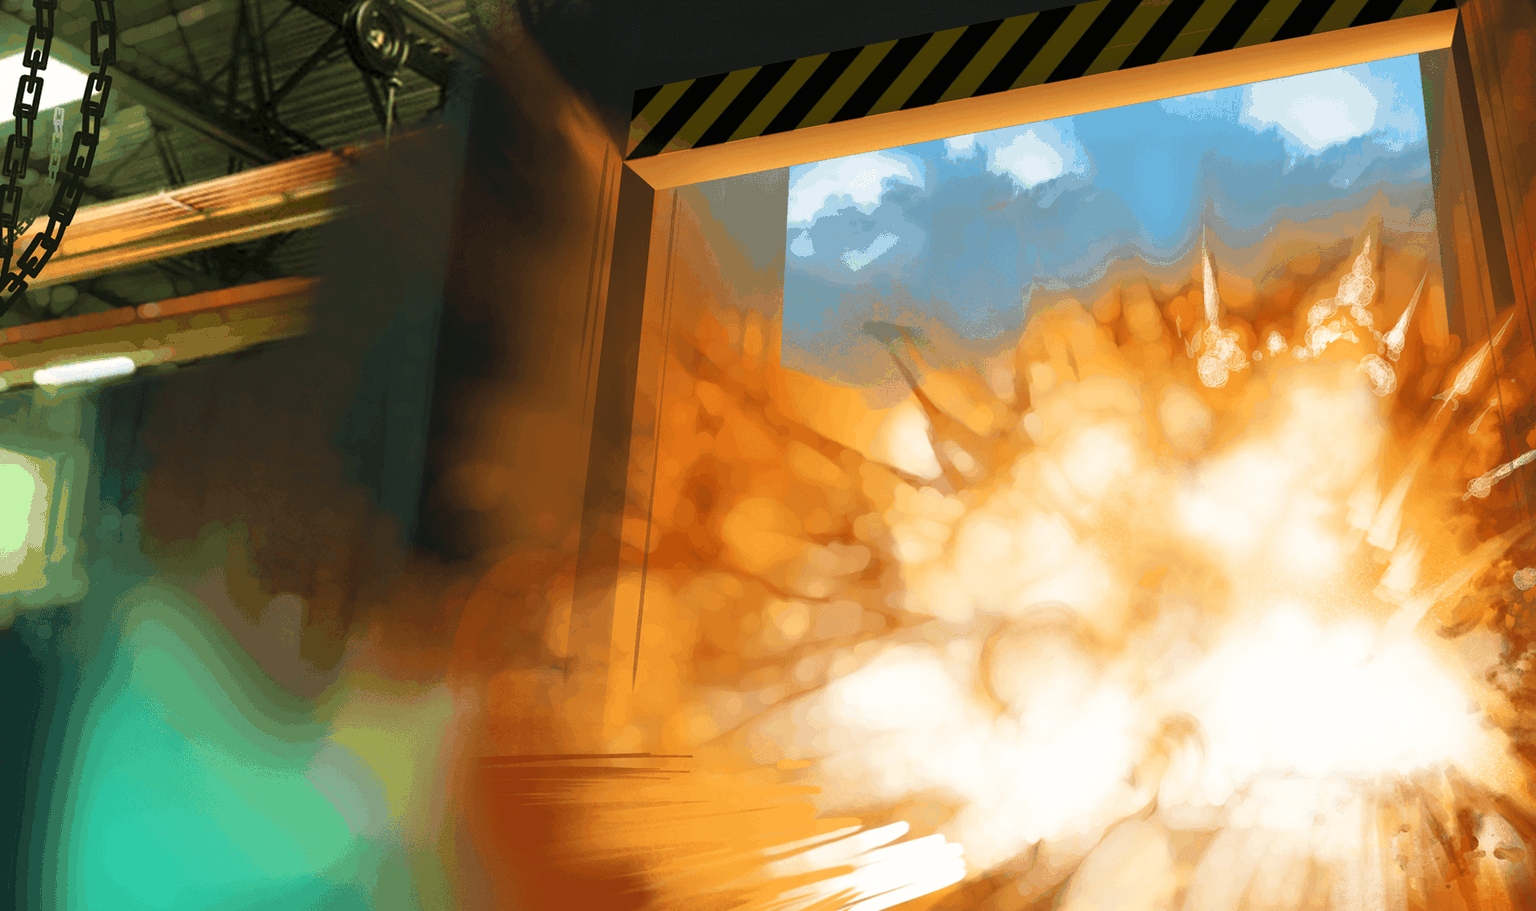 Game scene with explosion